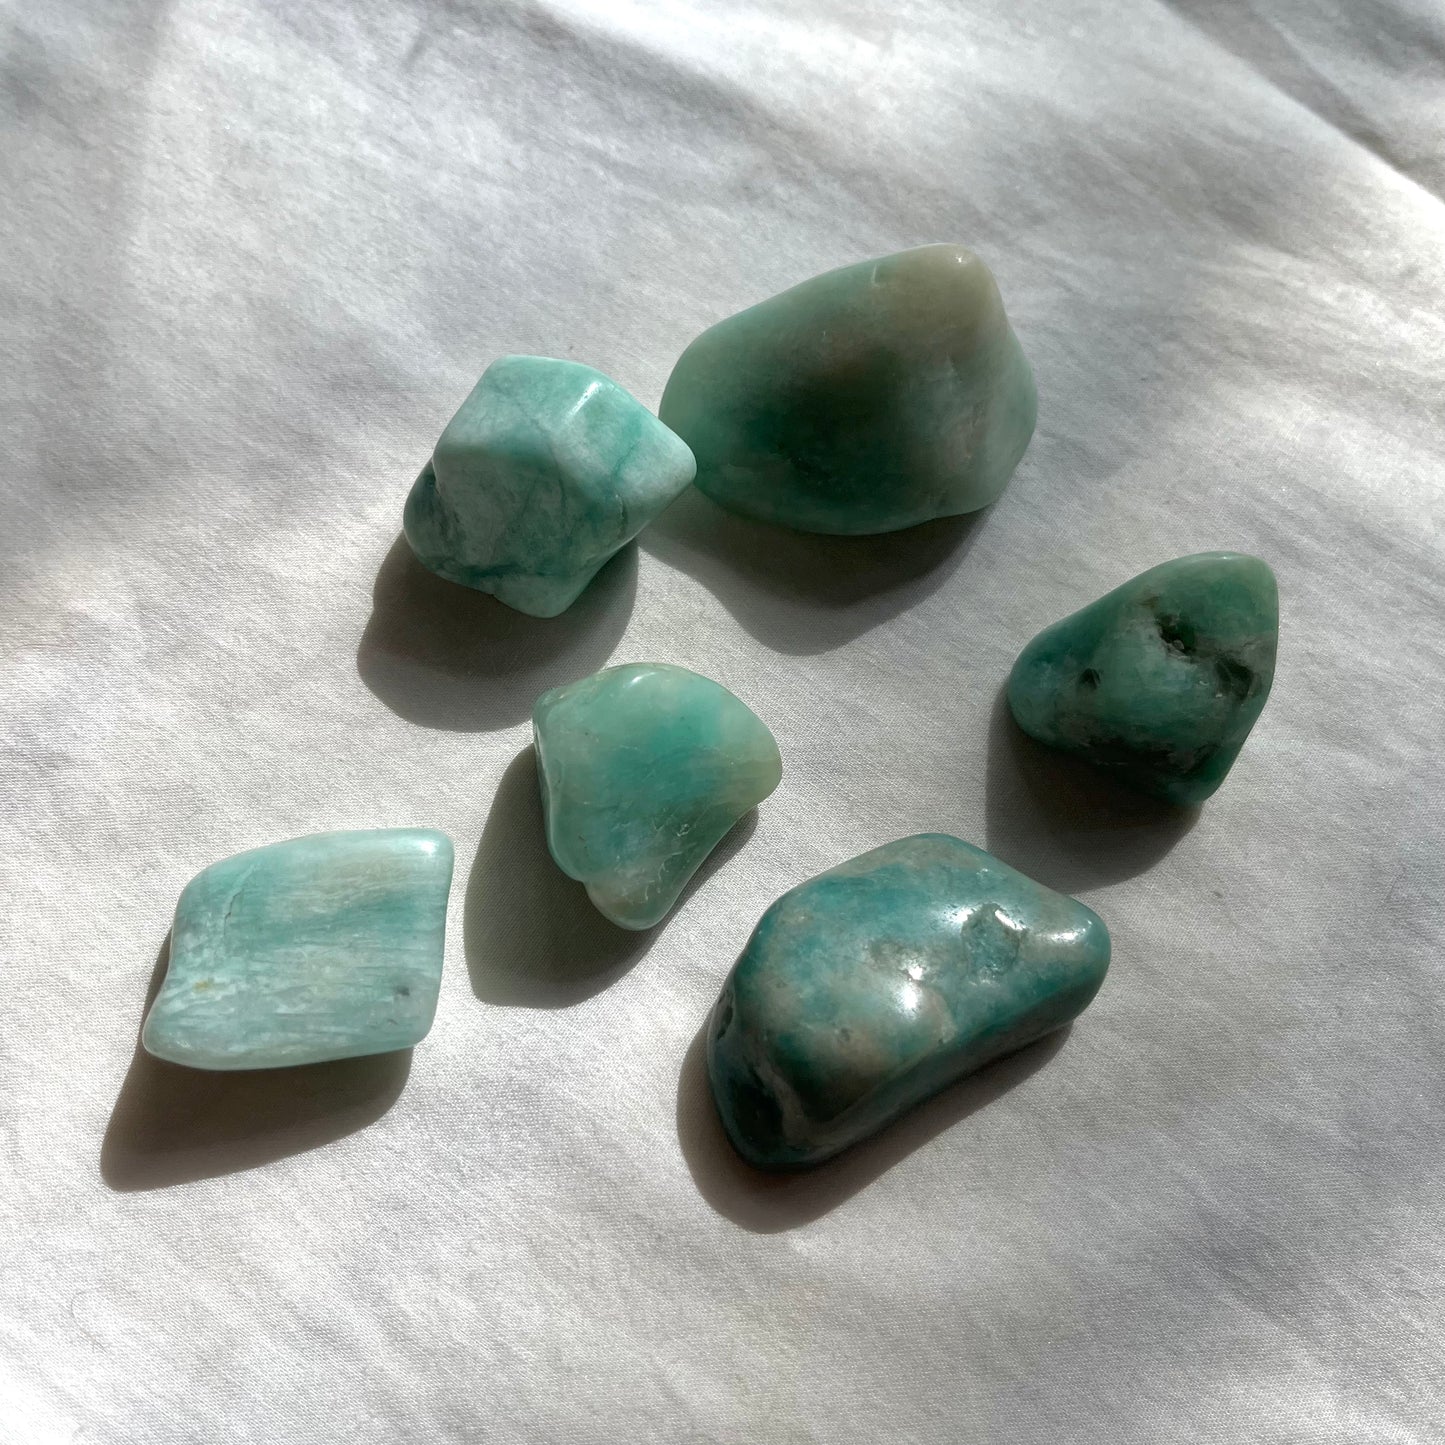 A group of amazonite crystal tumble stones